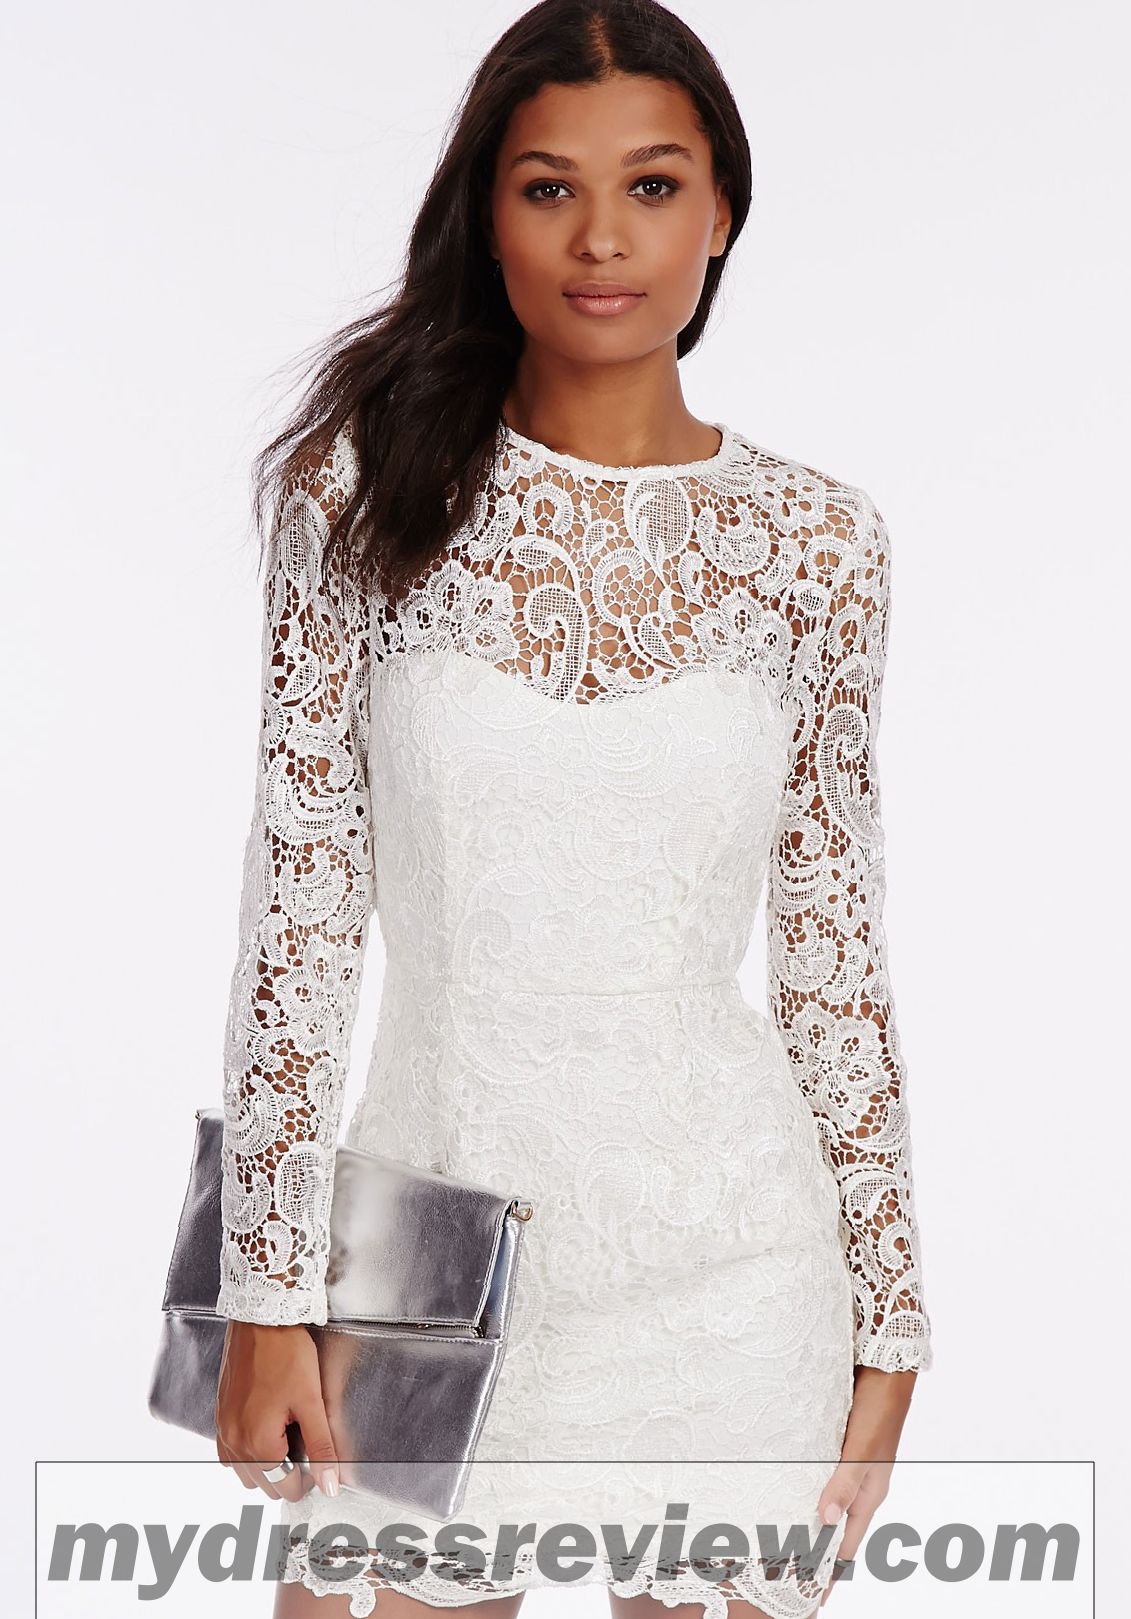 Long White Dress With Lace : 18 Best Images